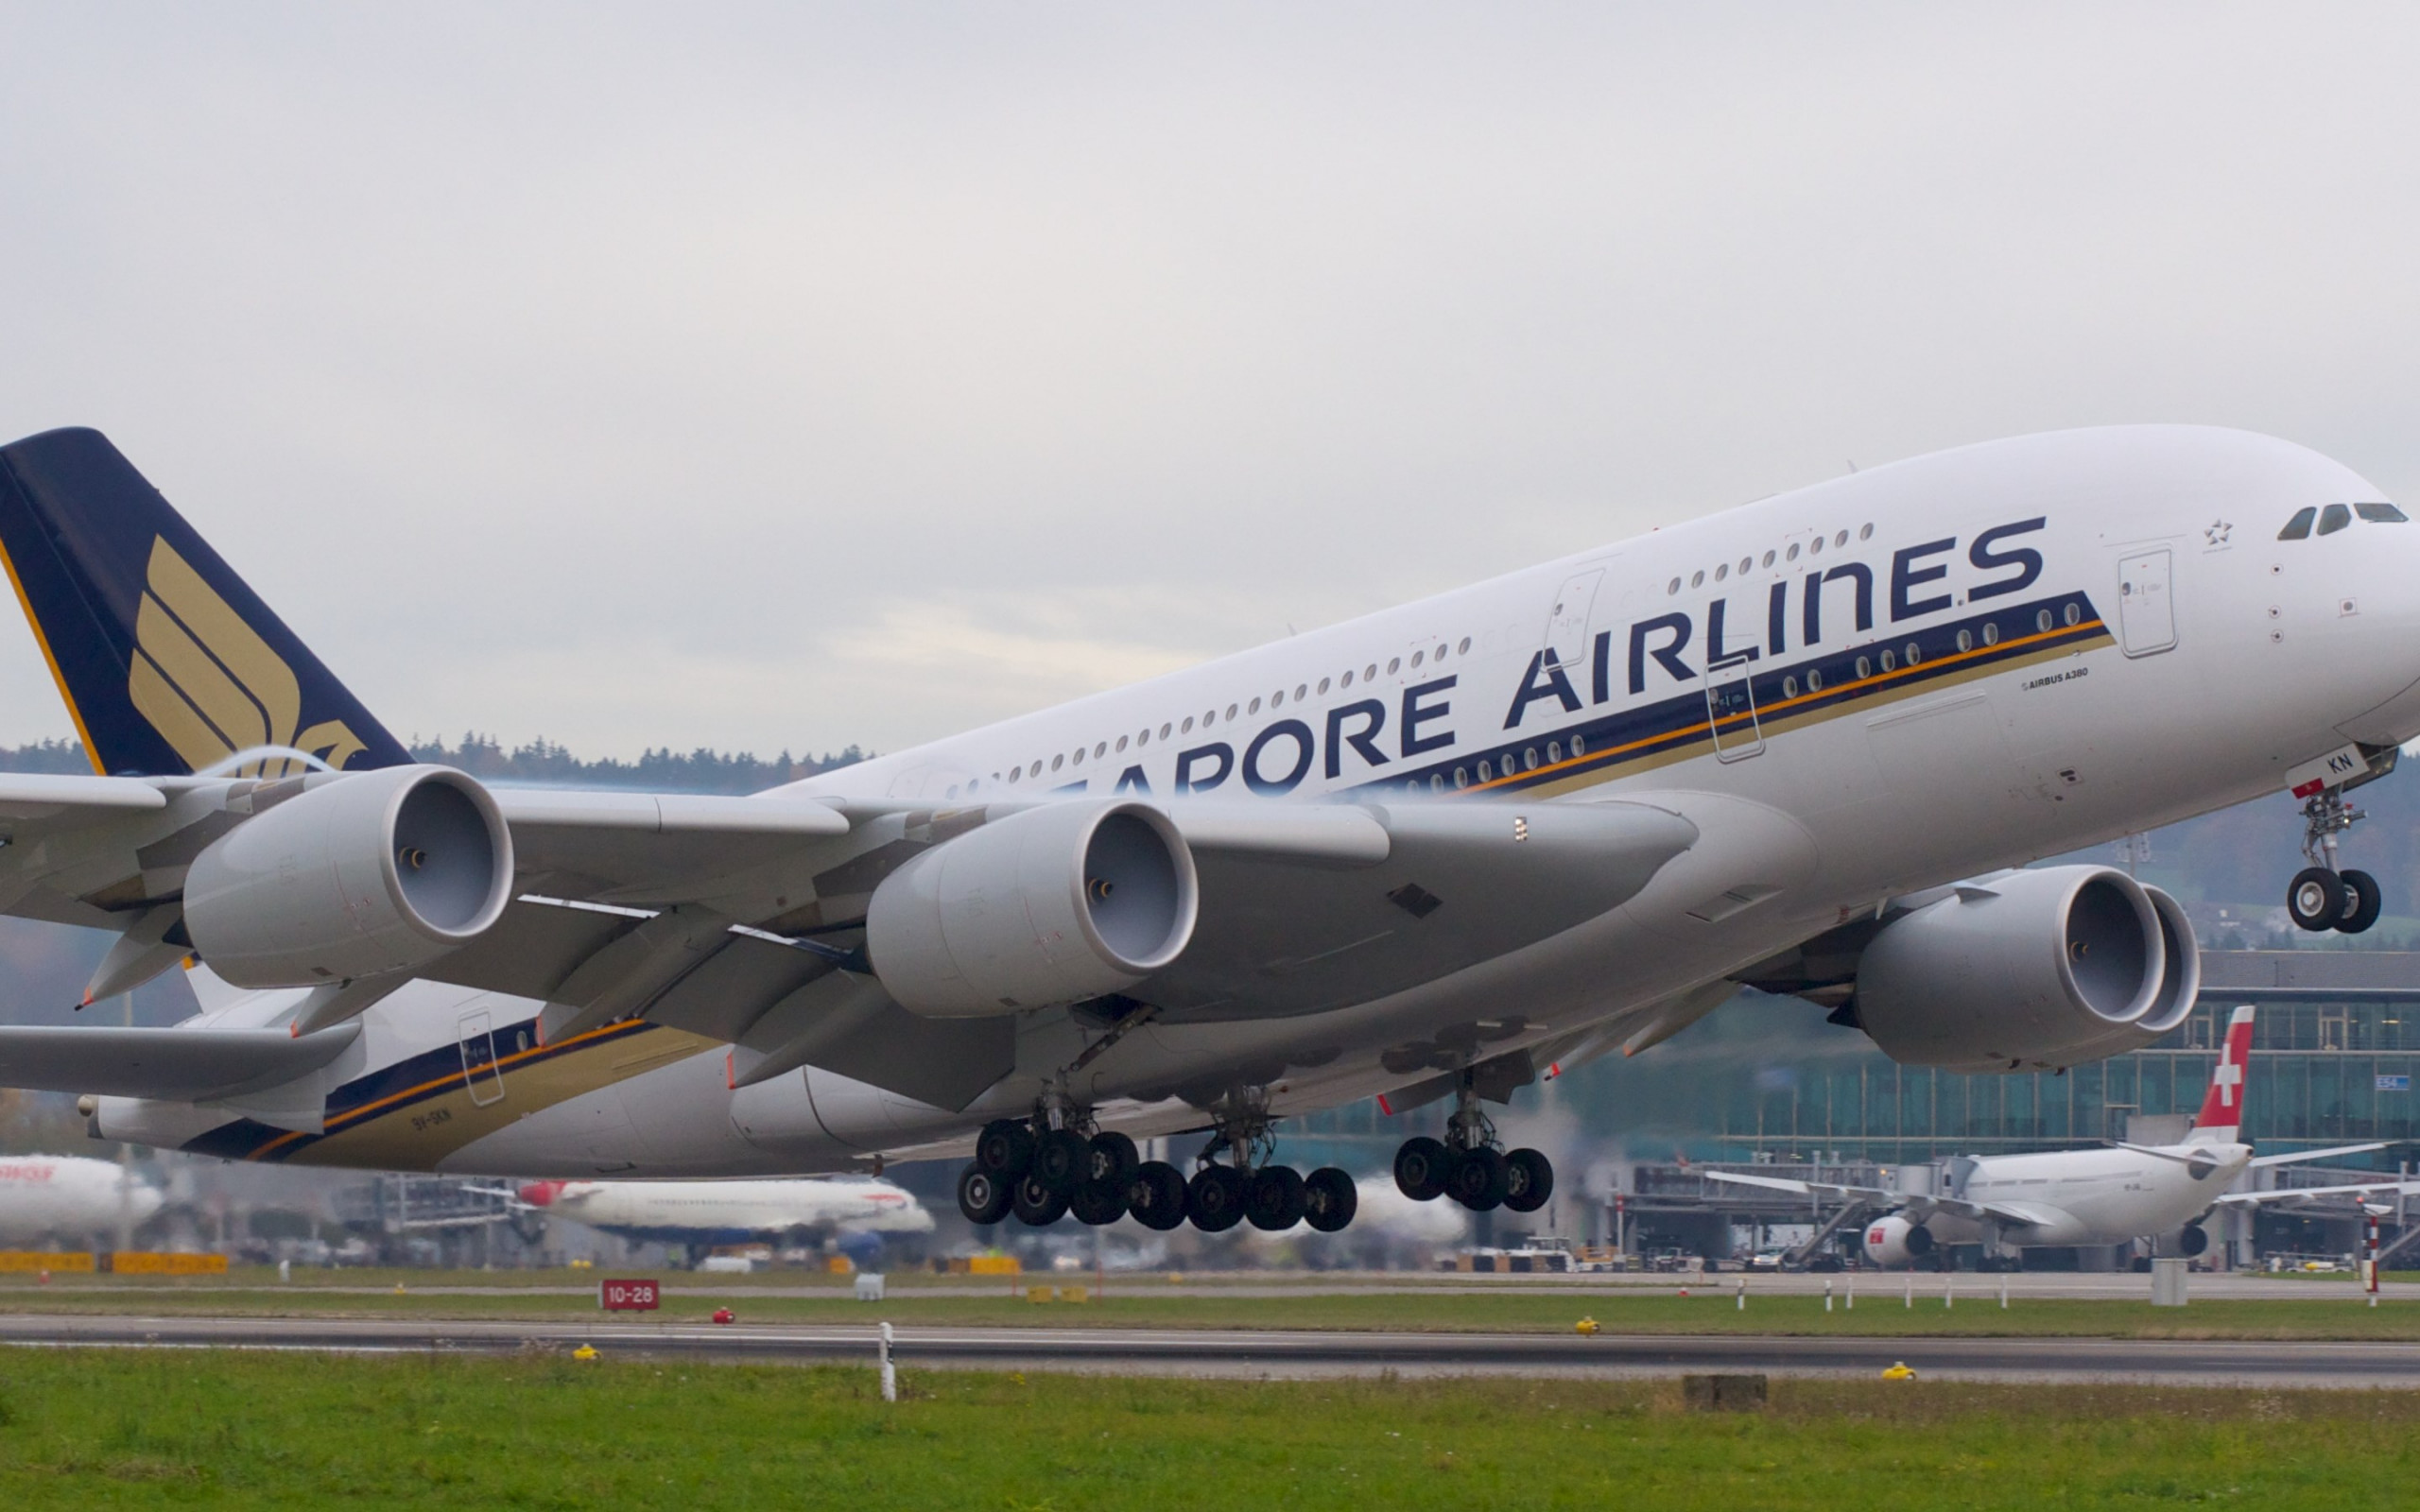 Passenger airplane from Singapore airlines wallpaper 2560x1600